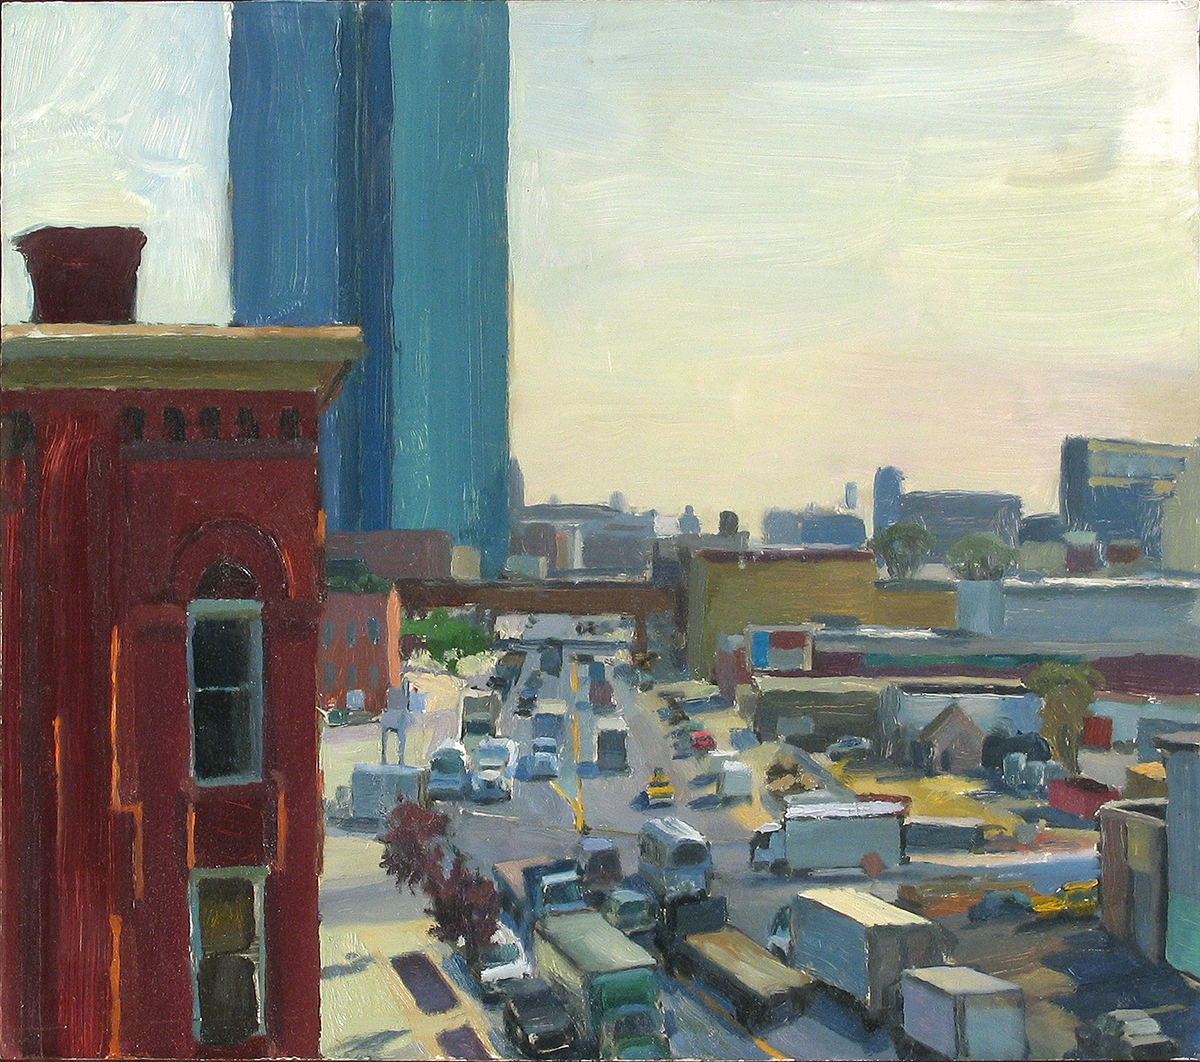  MORNING TRAFFIC oil on panel 14 x 16” 2001 (sold) 